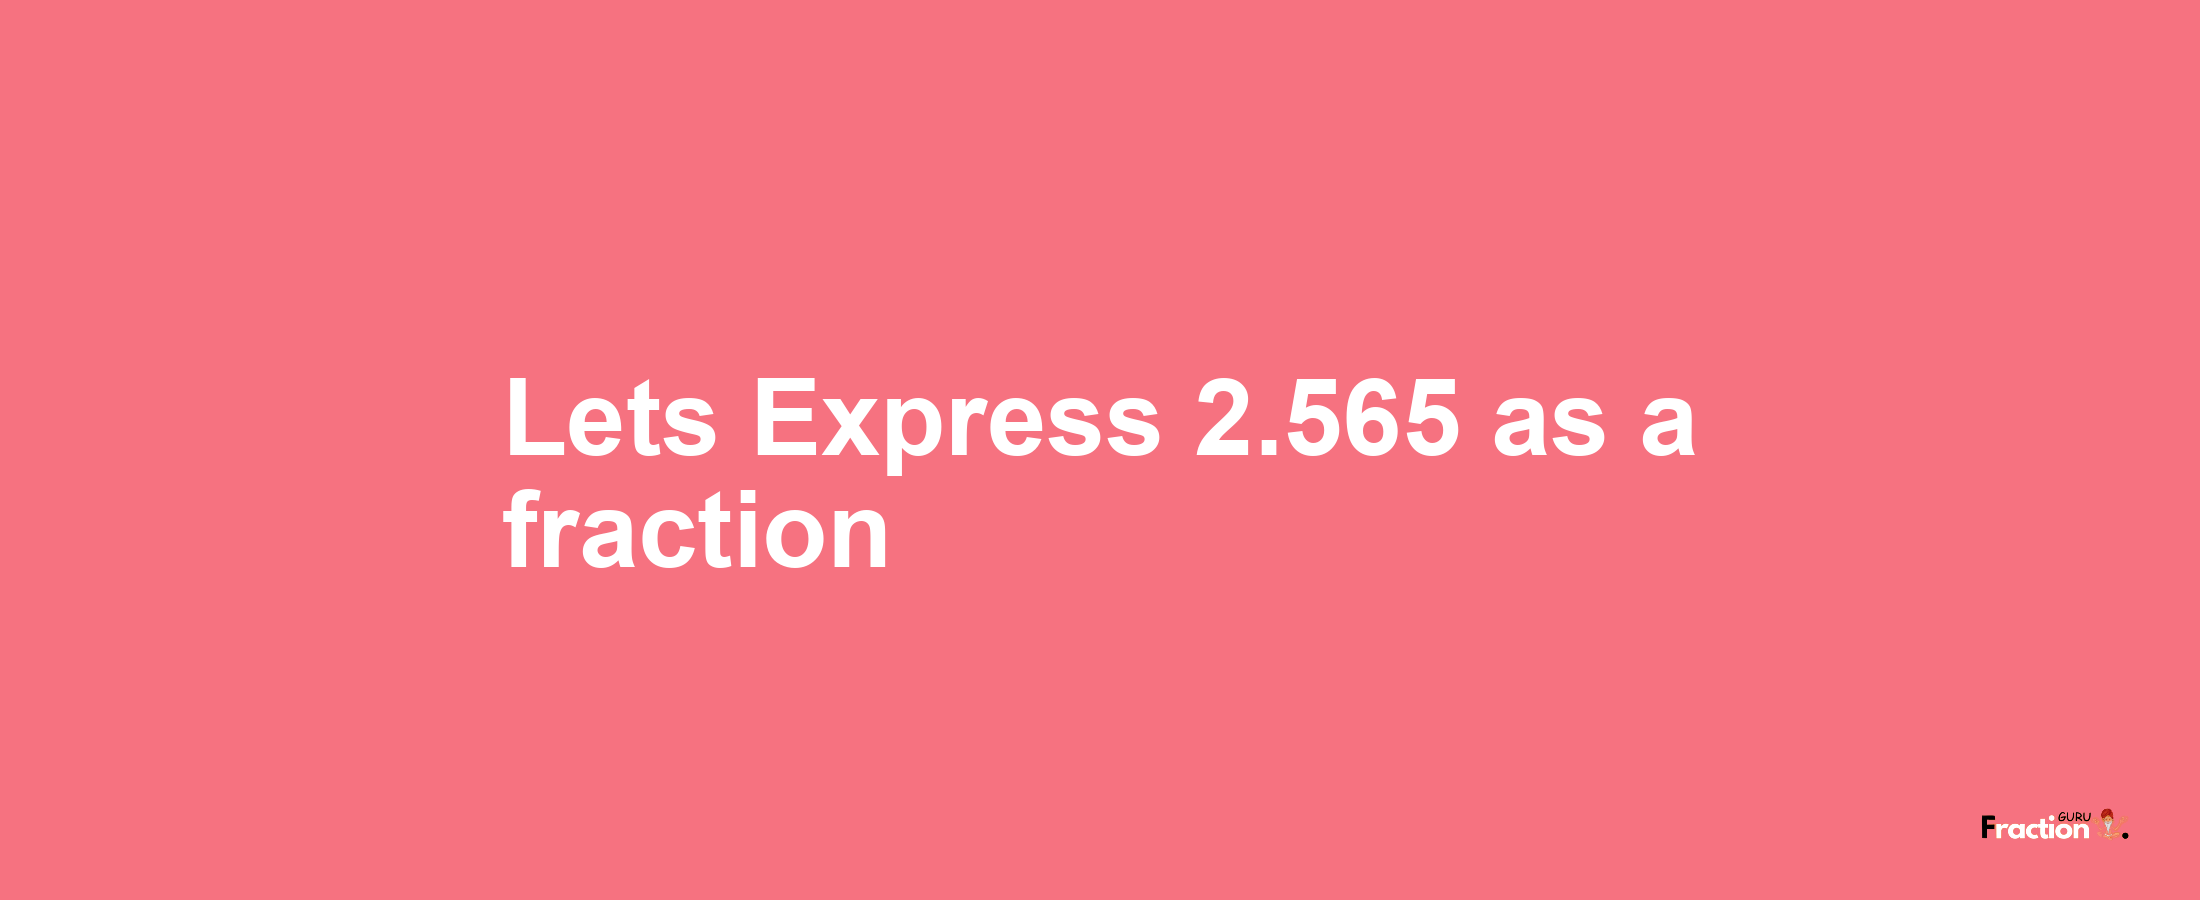 Lets Express 2.565 as afraction